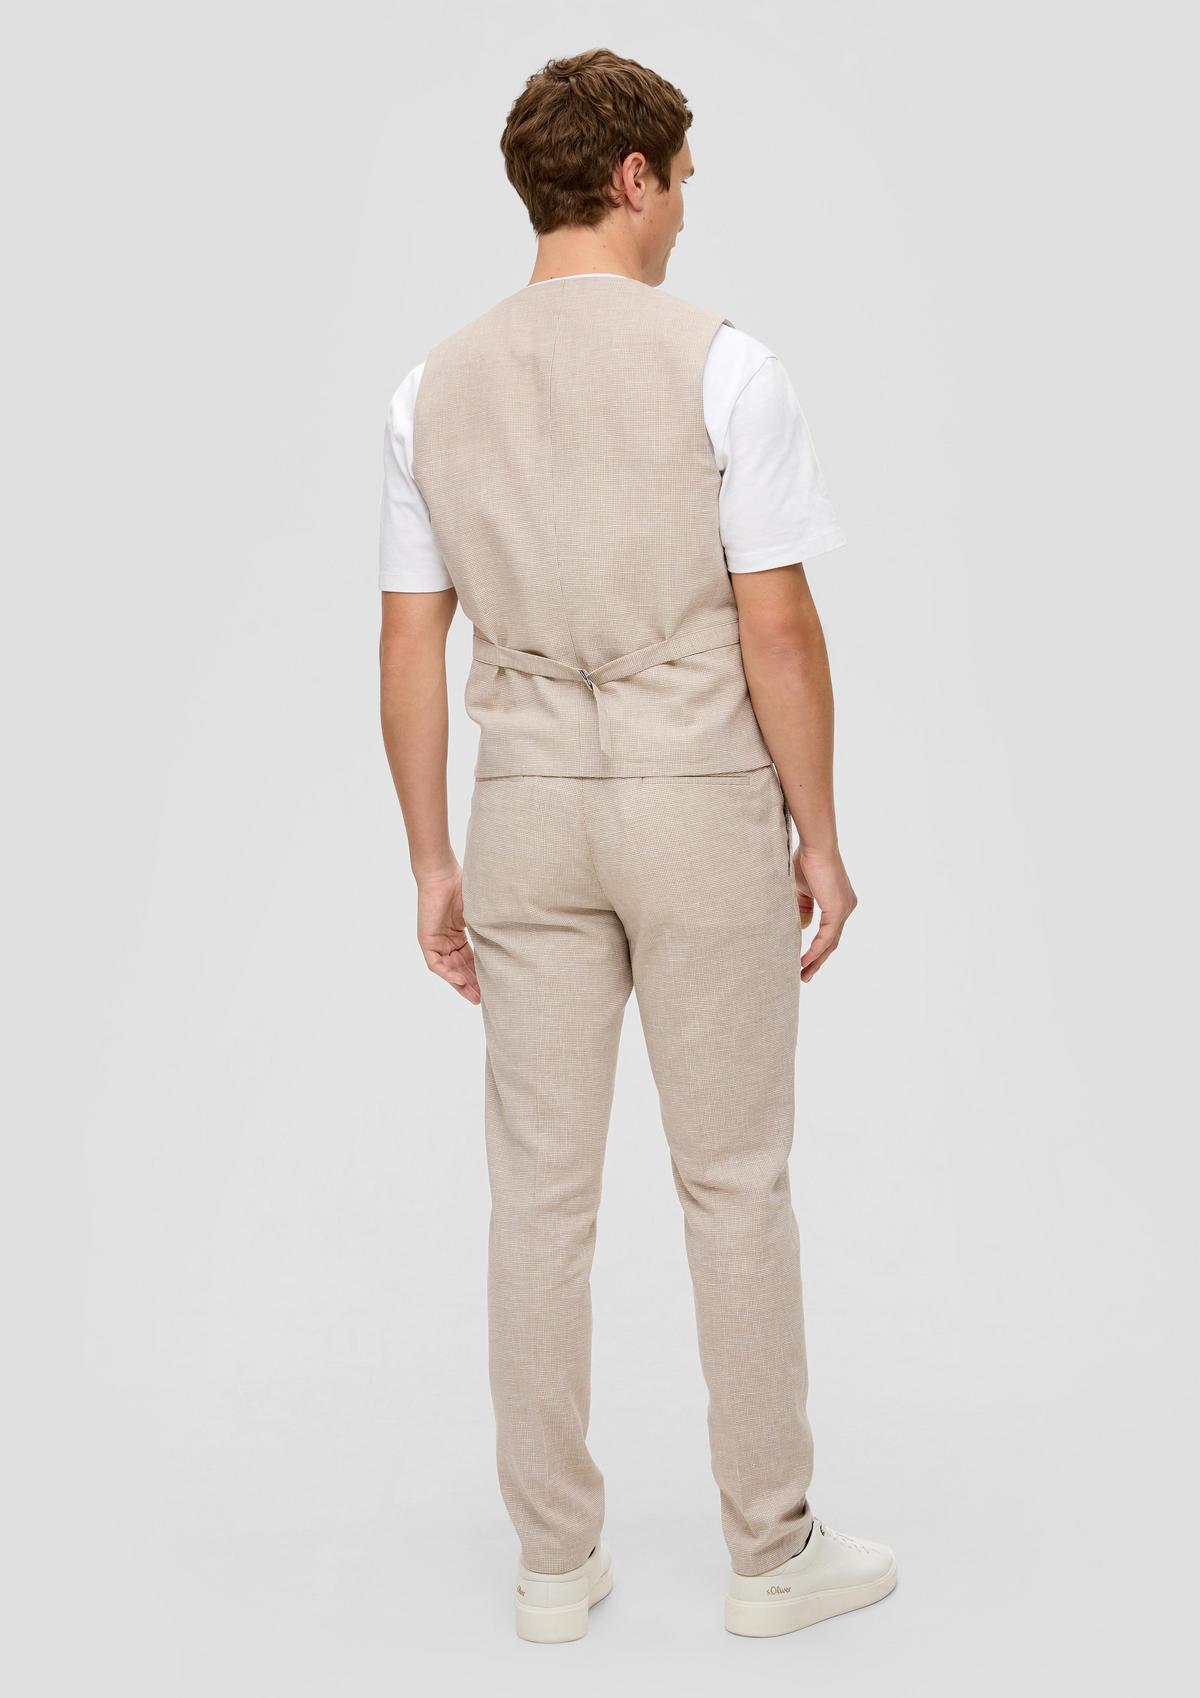 s.Oliver s.ONICE: Slim fit waistcoat